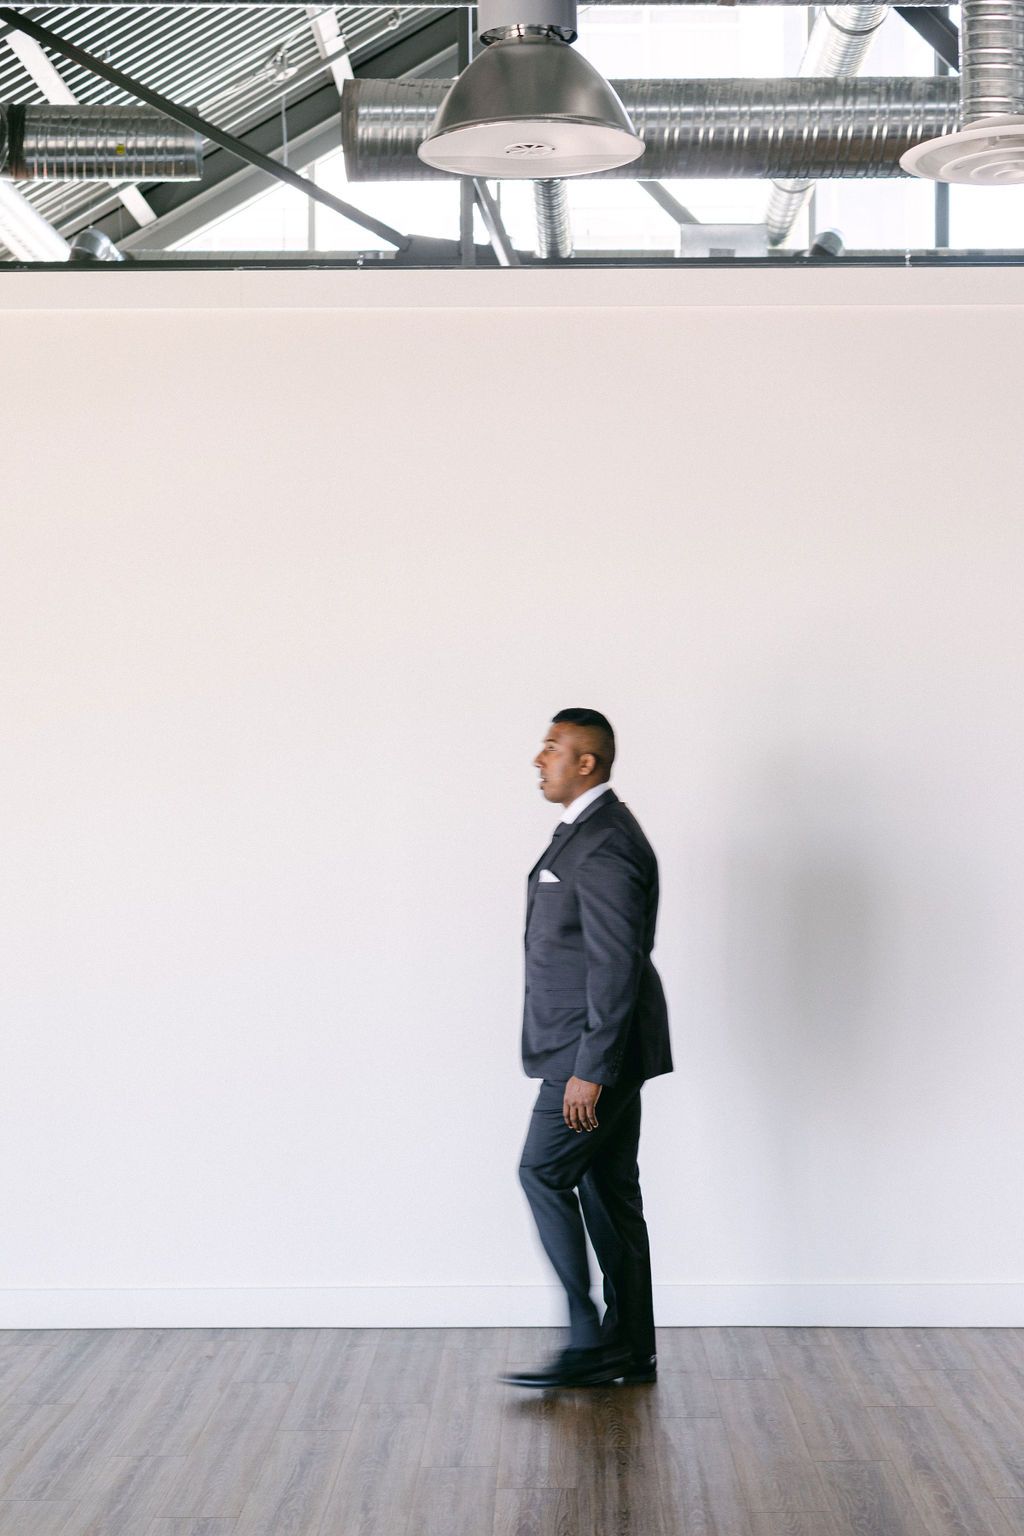 Charcoal Grey suit and tie for groom's fashion inspiration in this Vancouver Wedding Inspiration.